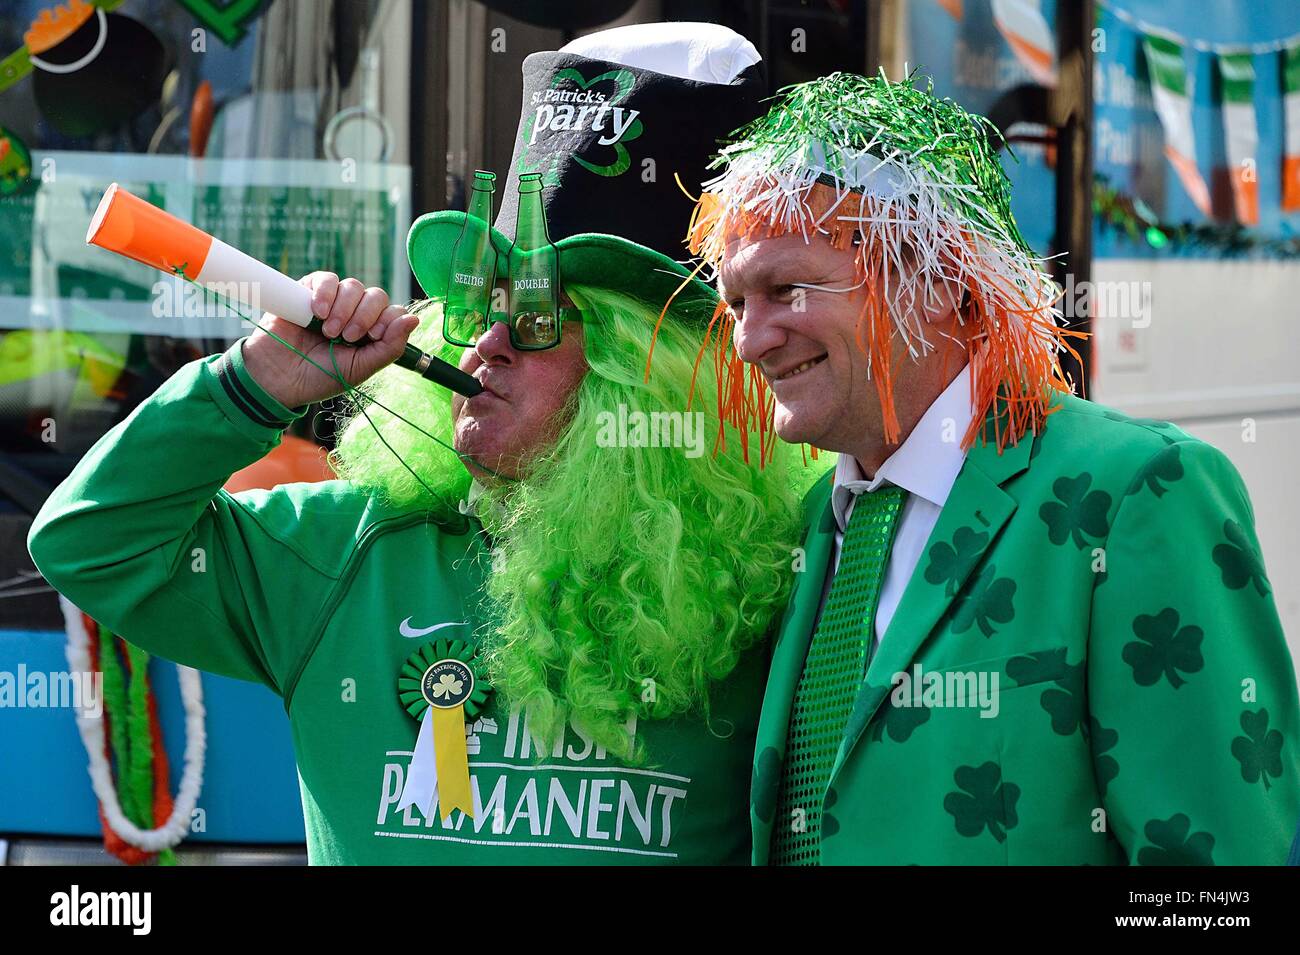 London, Britain. 13th Mar, 2016. Two men pose for photo to celebrate St. Patrick's Day in London, Britain, on March 13, 2016. © Ray Tang/Xinhua/Alamy Live News Stock Photo